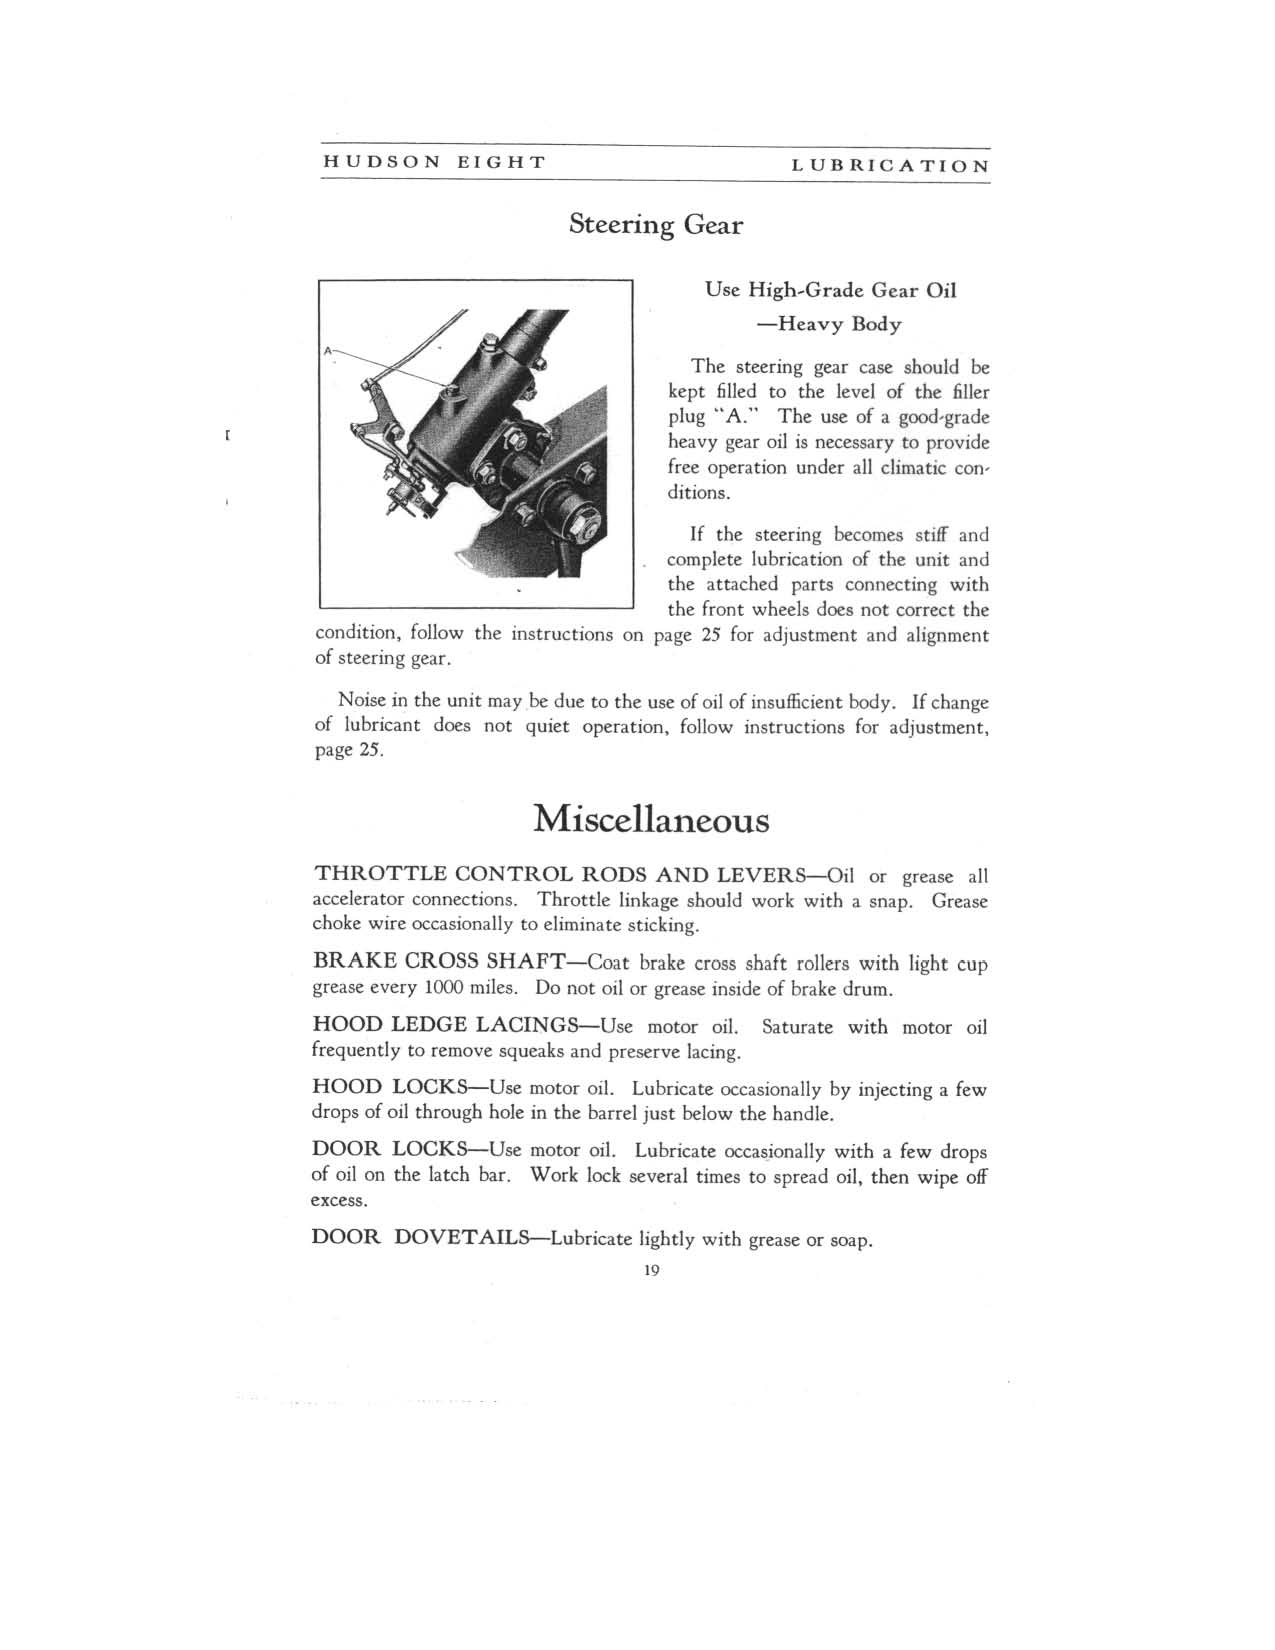 1931 Hudson 8 Instruction Book Page 4